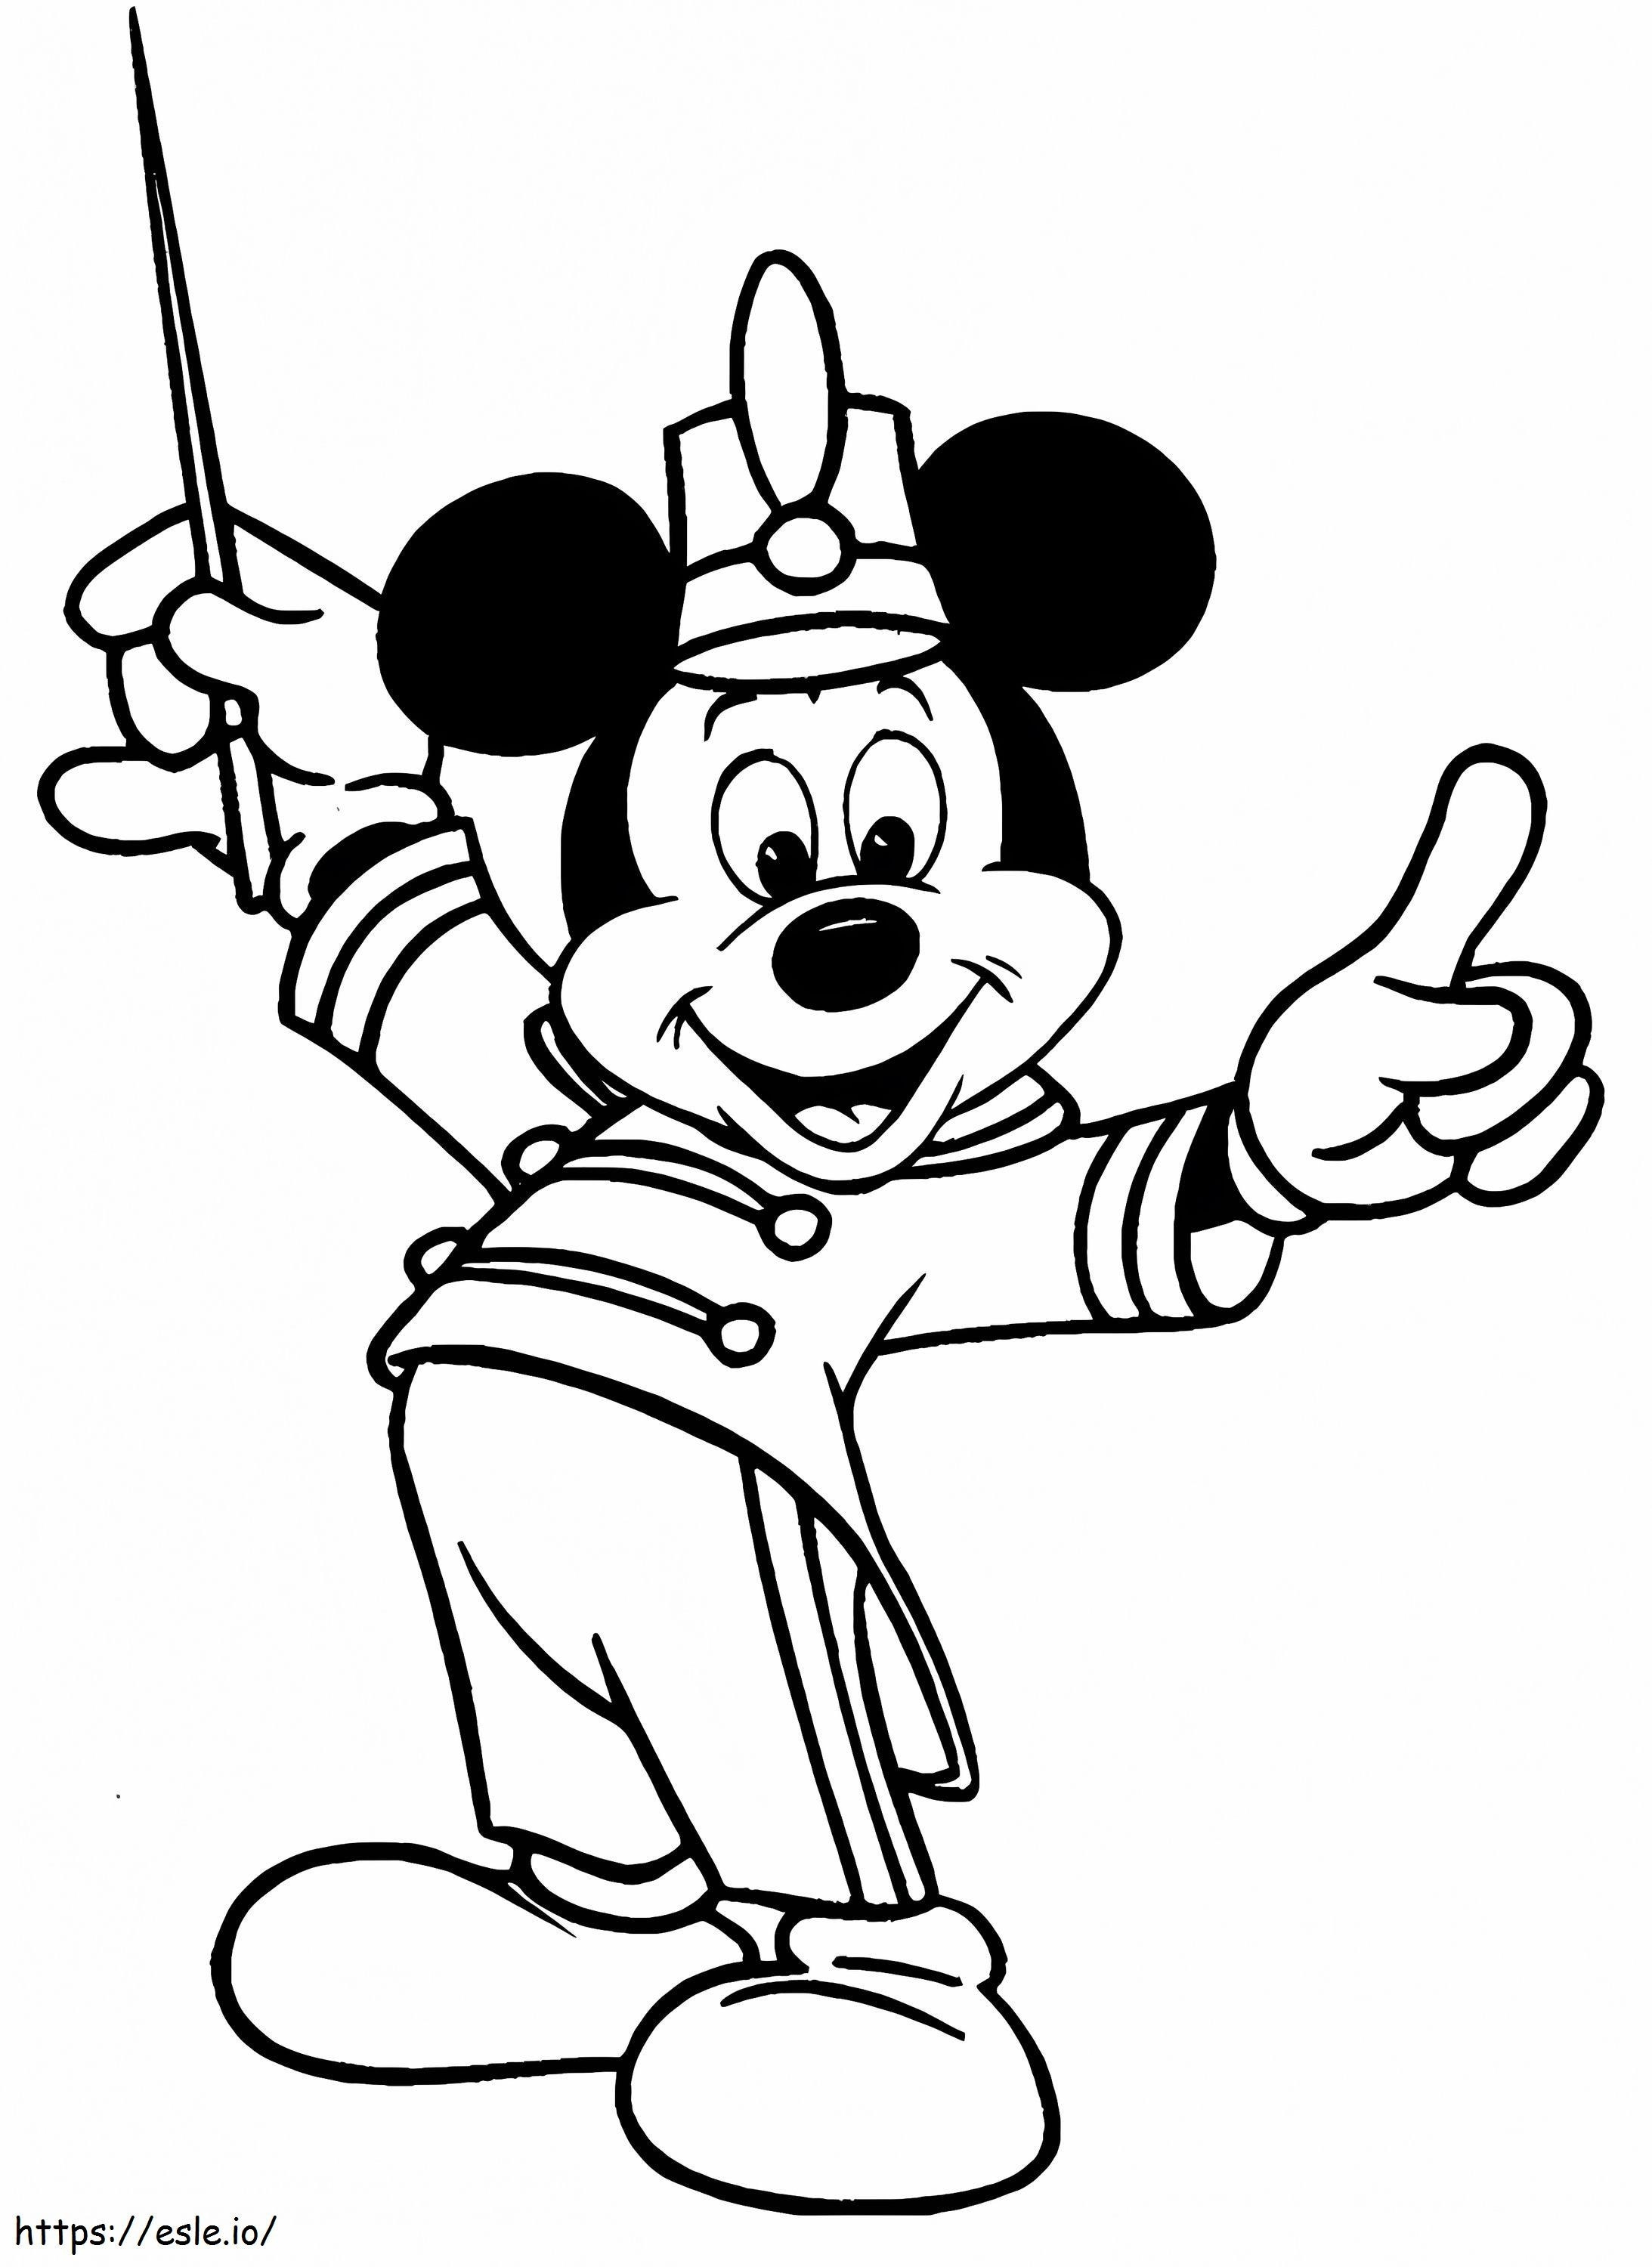 Mickey 1 746X1024 coloring page